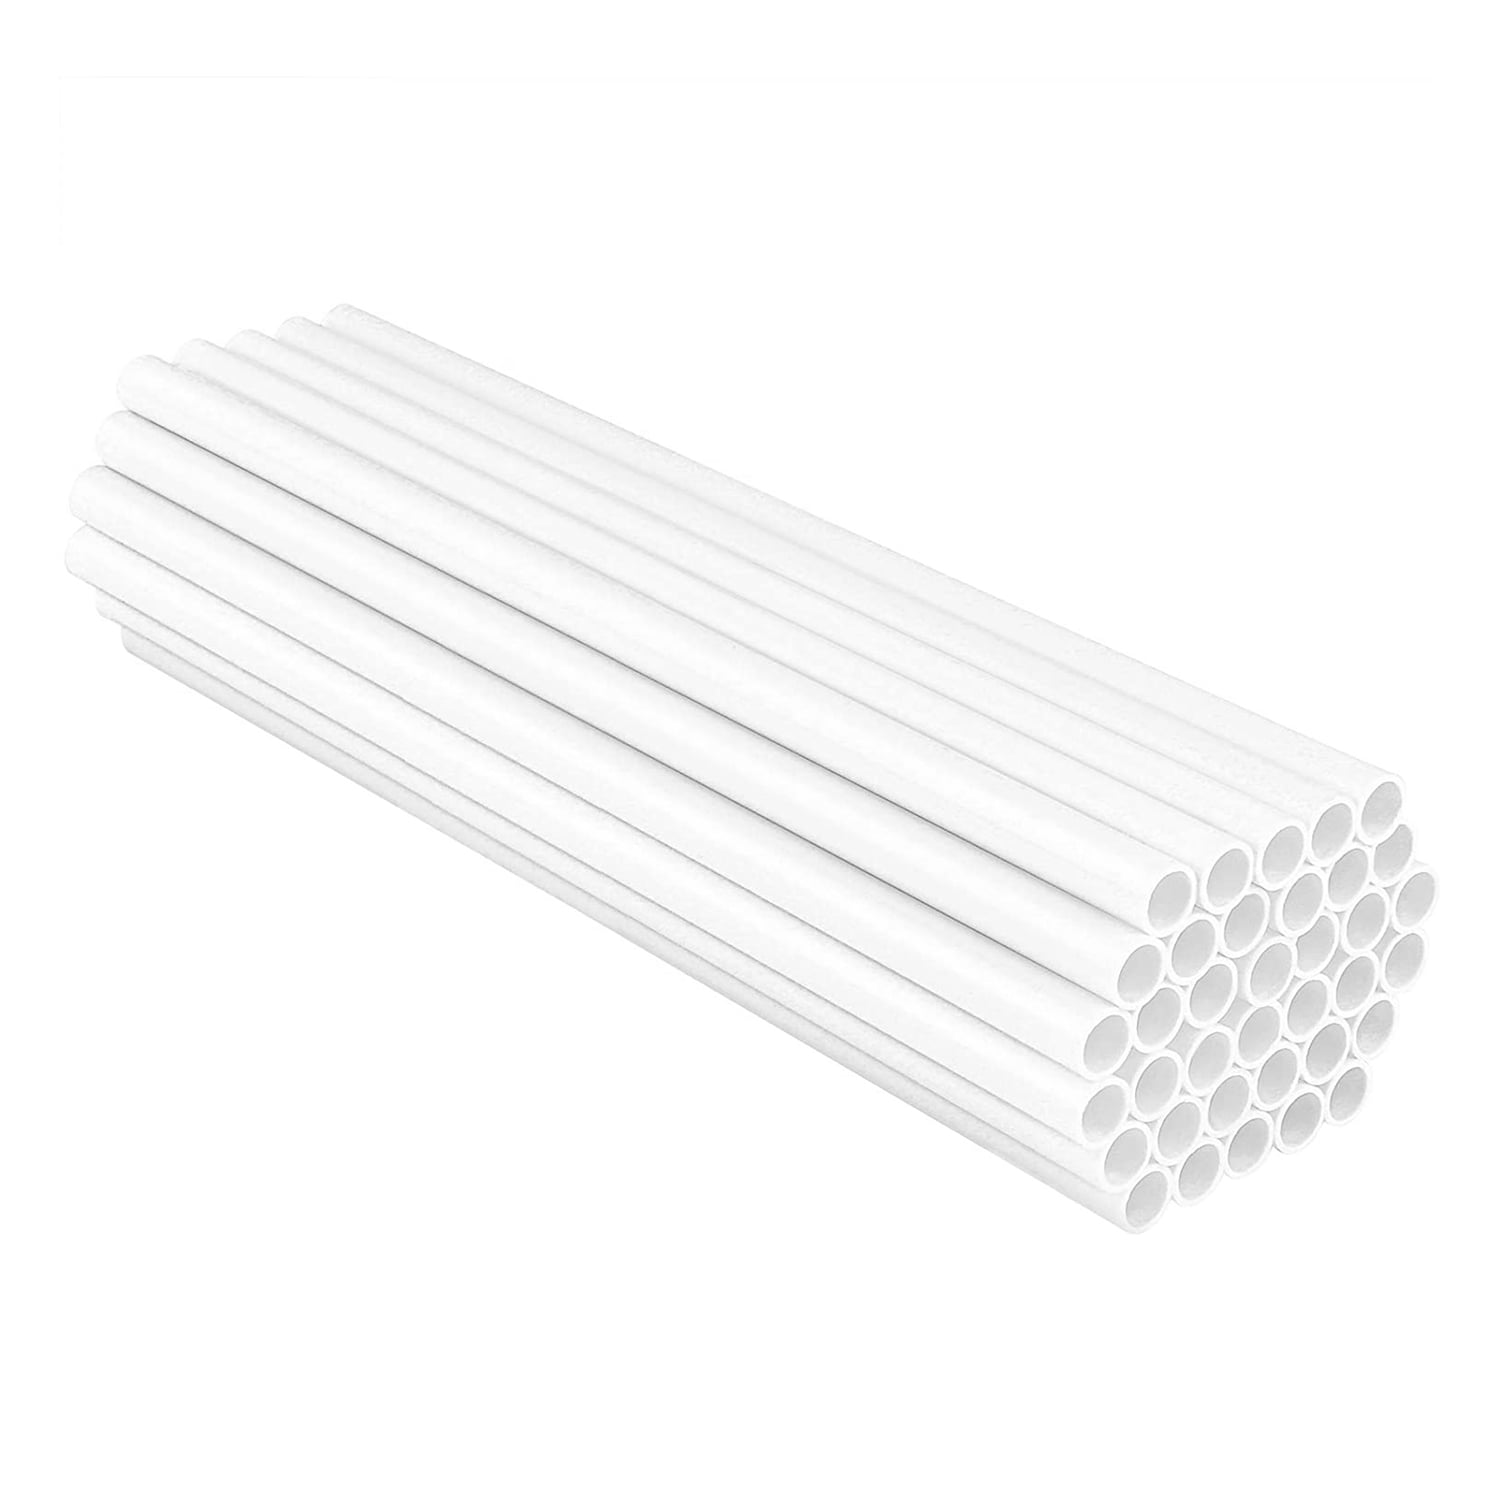 Poly-Dowels® Large White Round Cake Dowels - 16 tall x 5/8 d